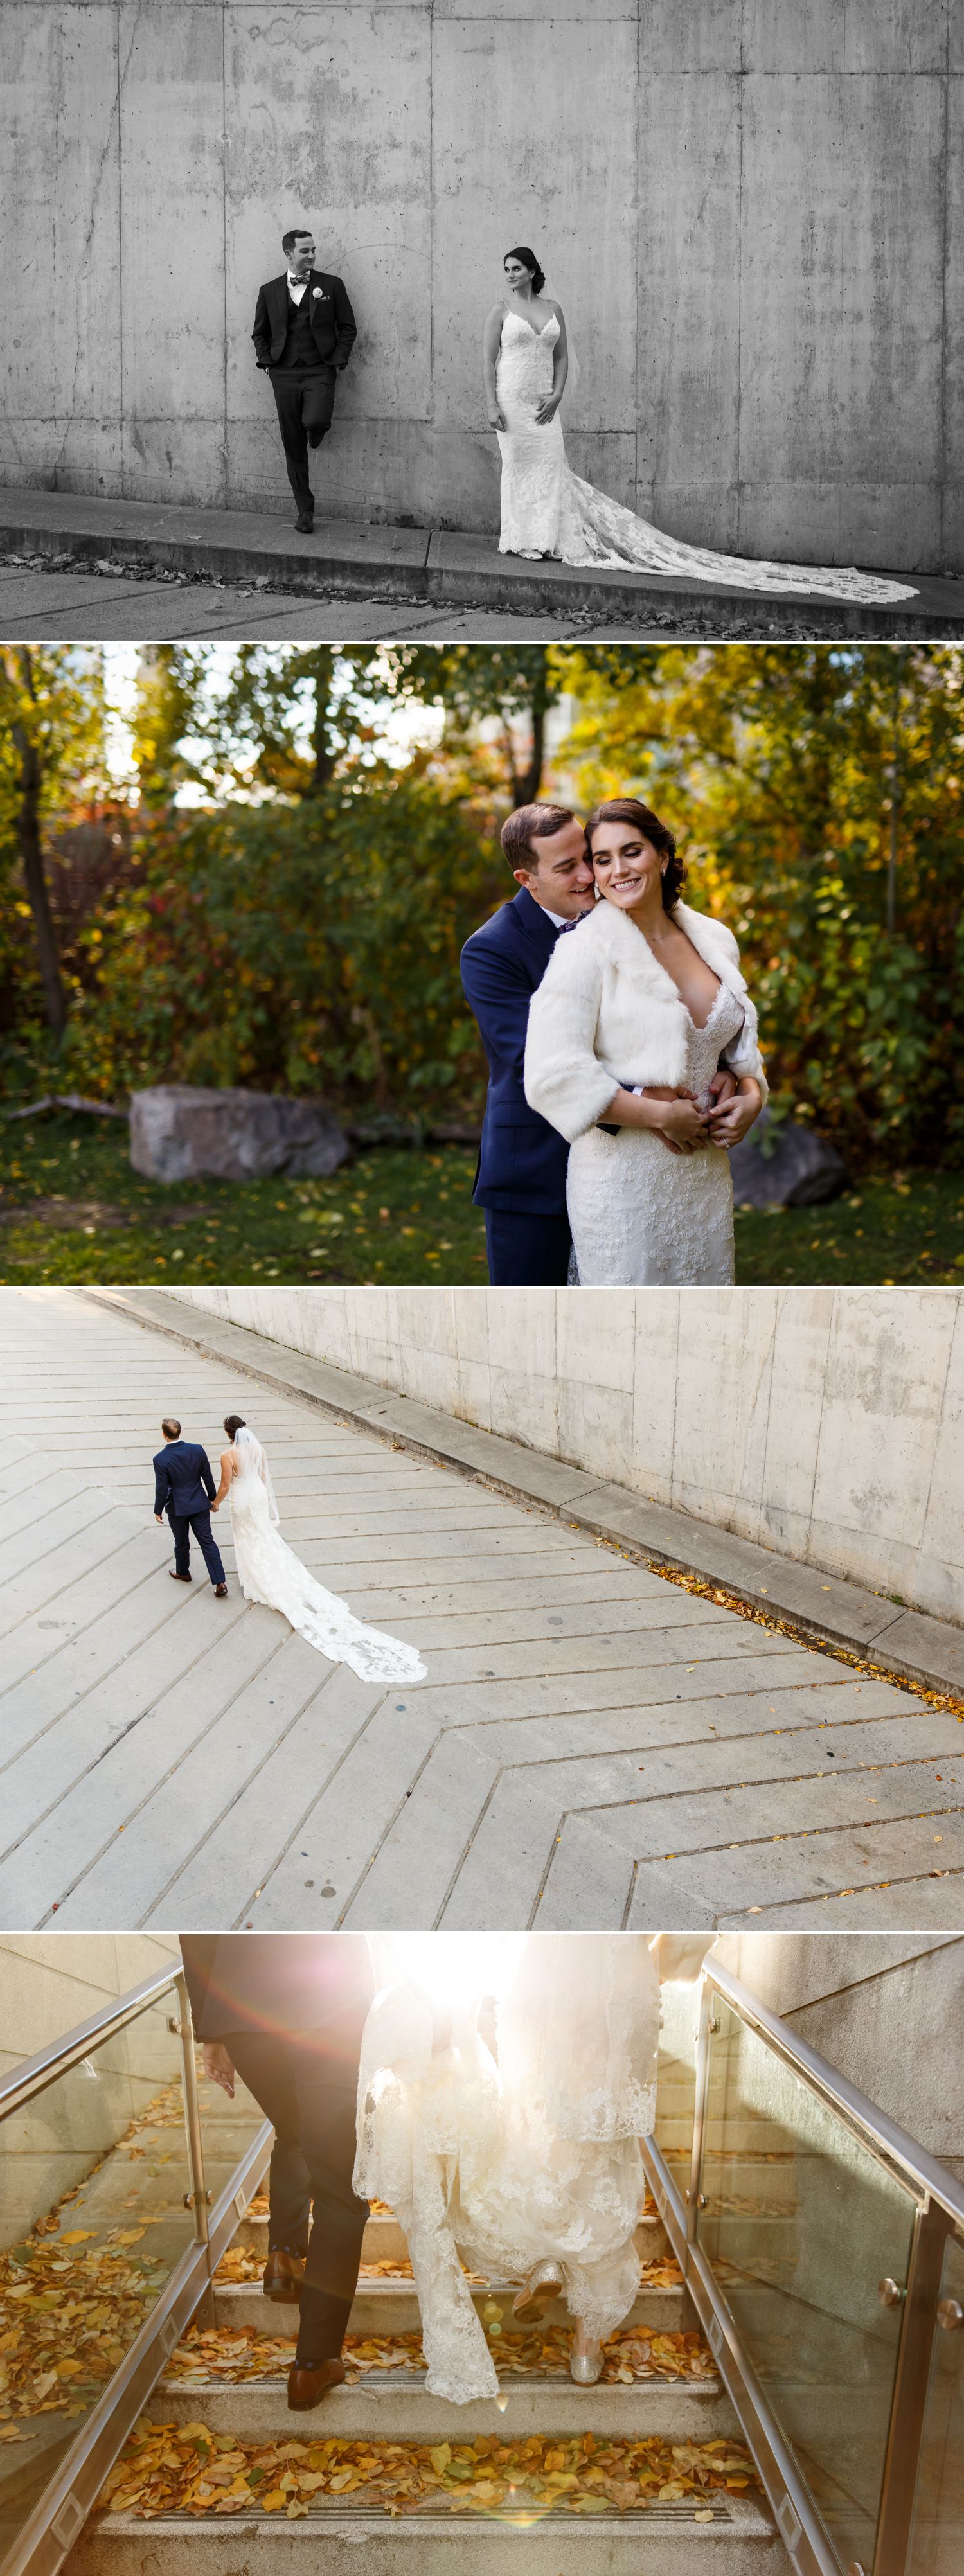 Portraits of the bride and groom taken before their wedding ceremony at the Museum of Nature in downtown Ottawa